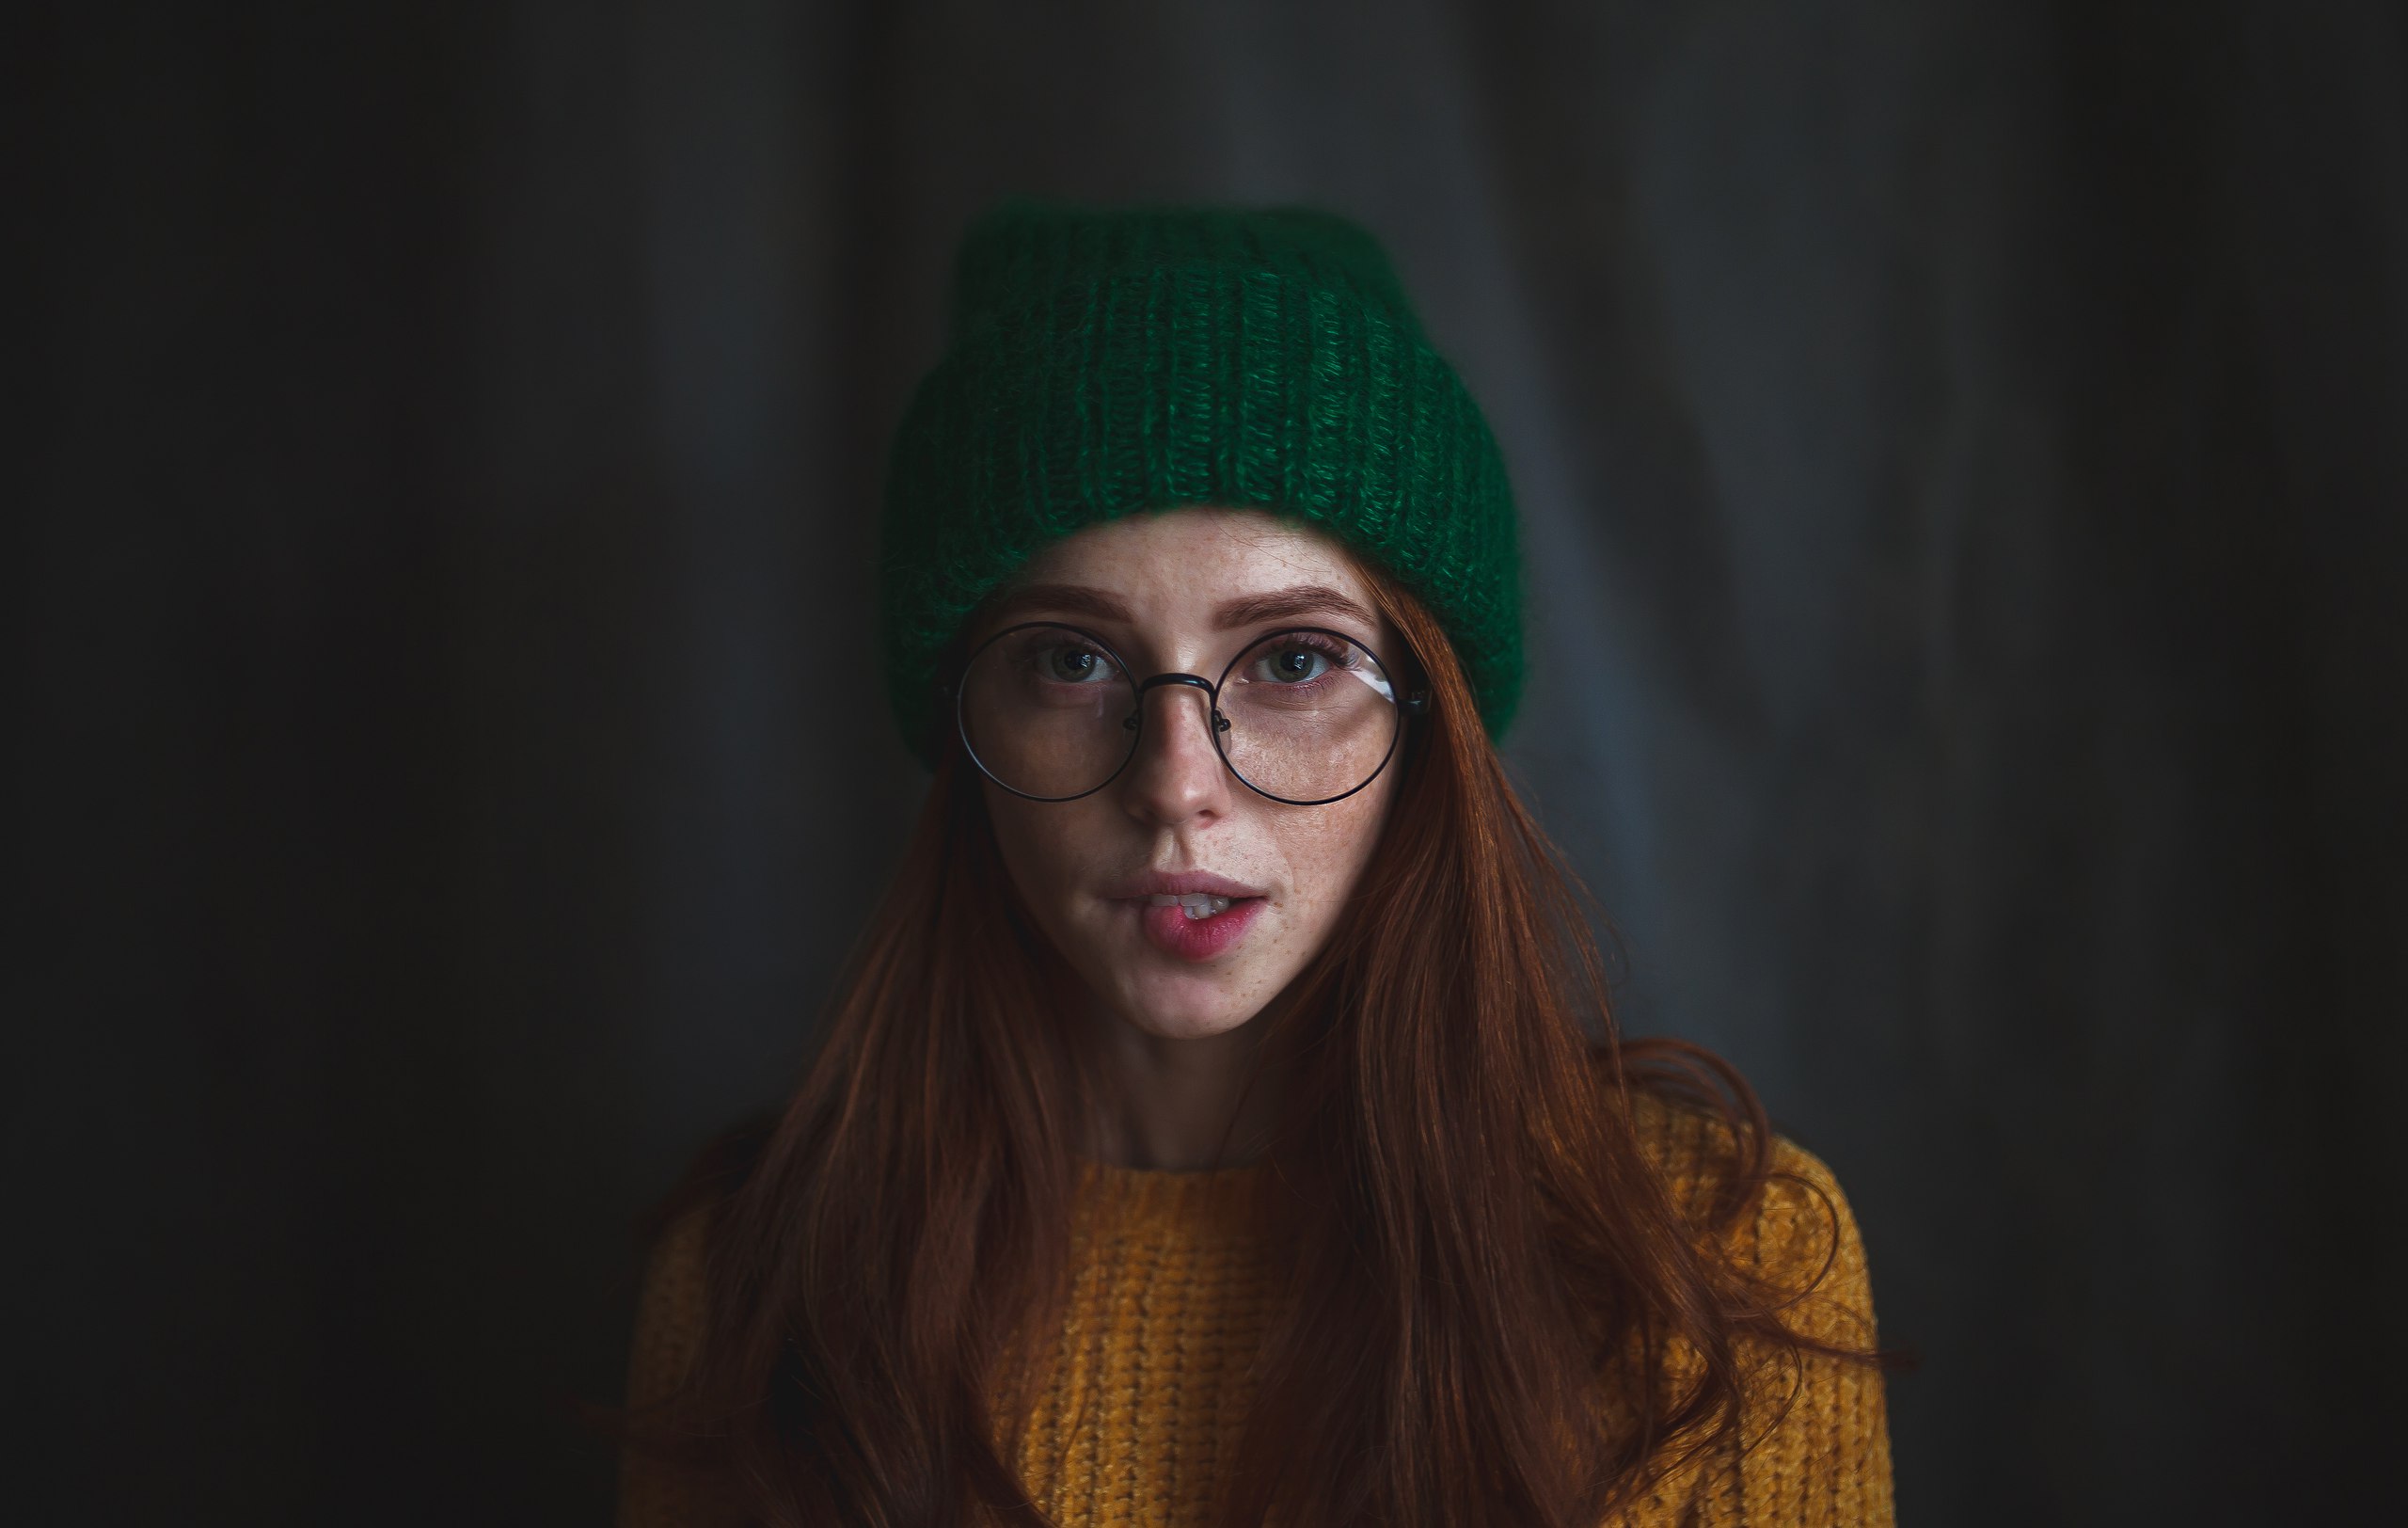 Portrait Women Model Women With Glasses Looking At Viewer Redhead Sweater Biting Lip Woolly Hat Wome 2560x1624